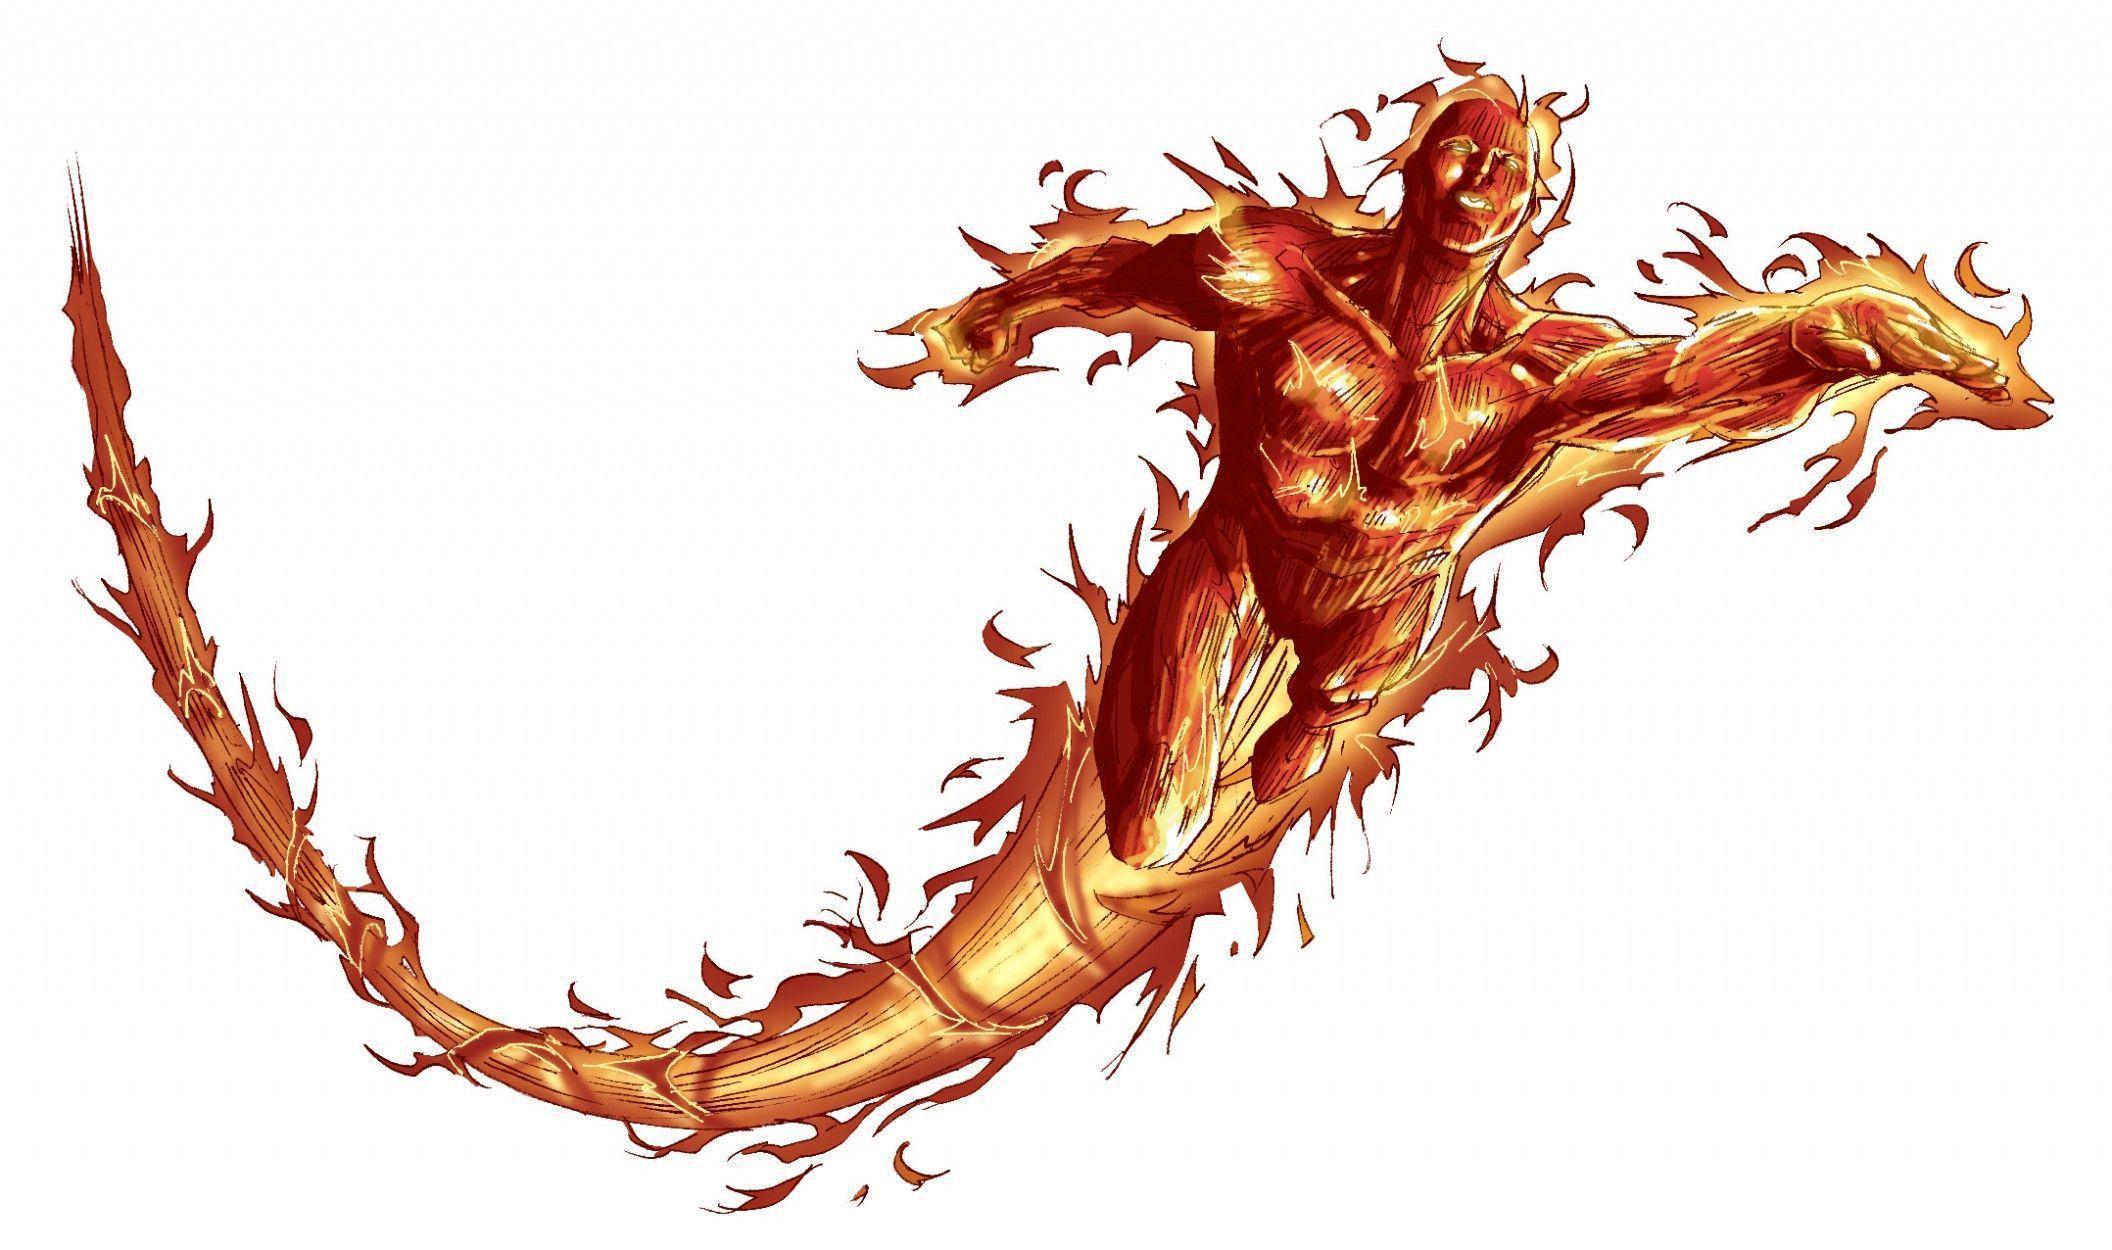 Pix For – Marvel Human Torch Wallpapers